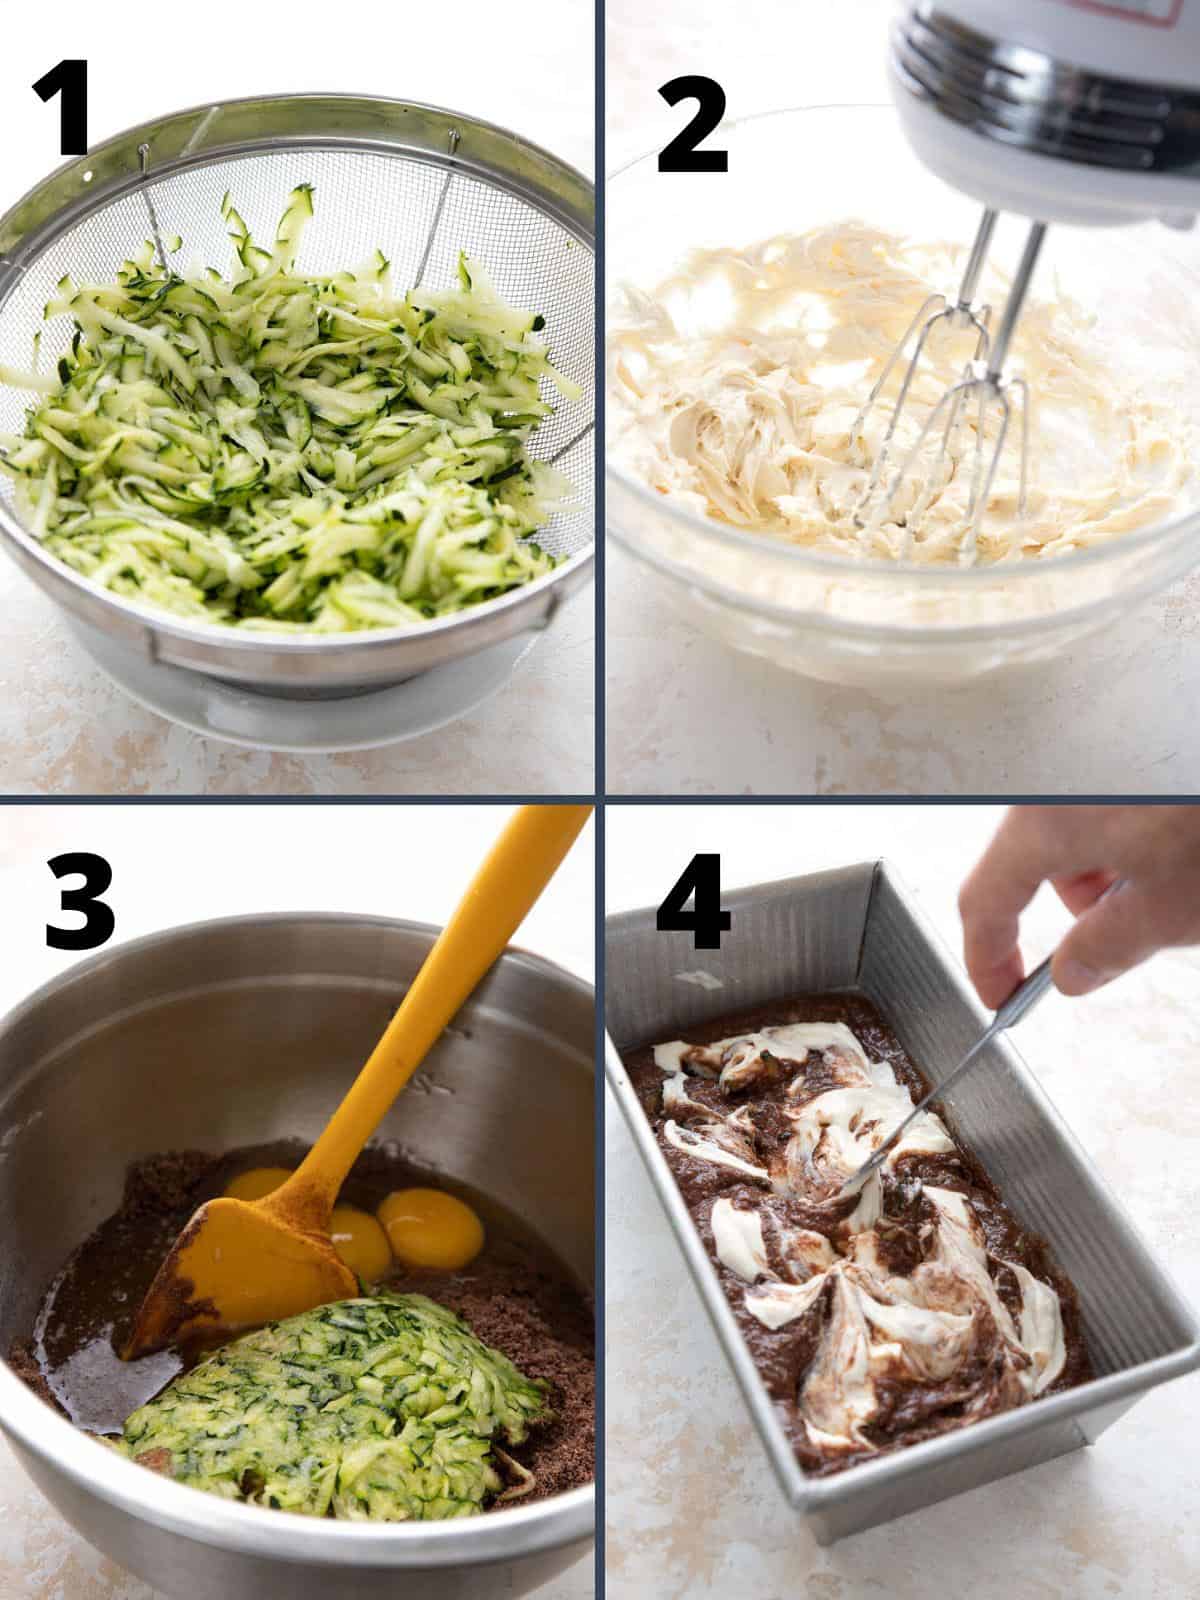 A collage of 4 images showing the steps for making Keto Chocolate Cream Cheese Zucchini Bread.